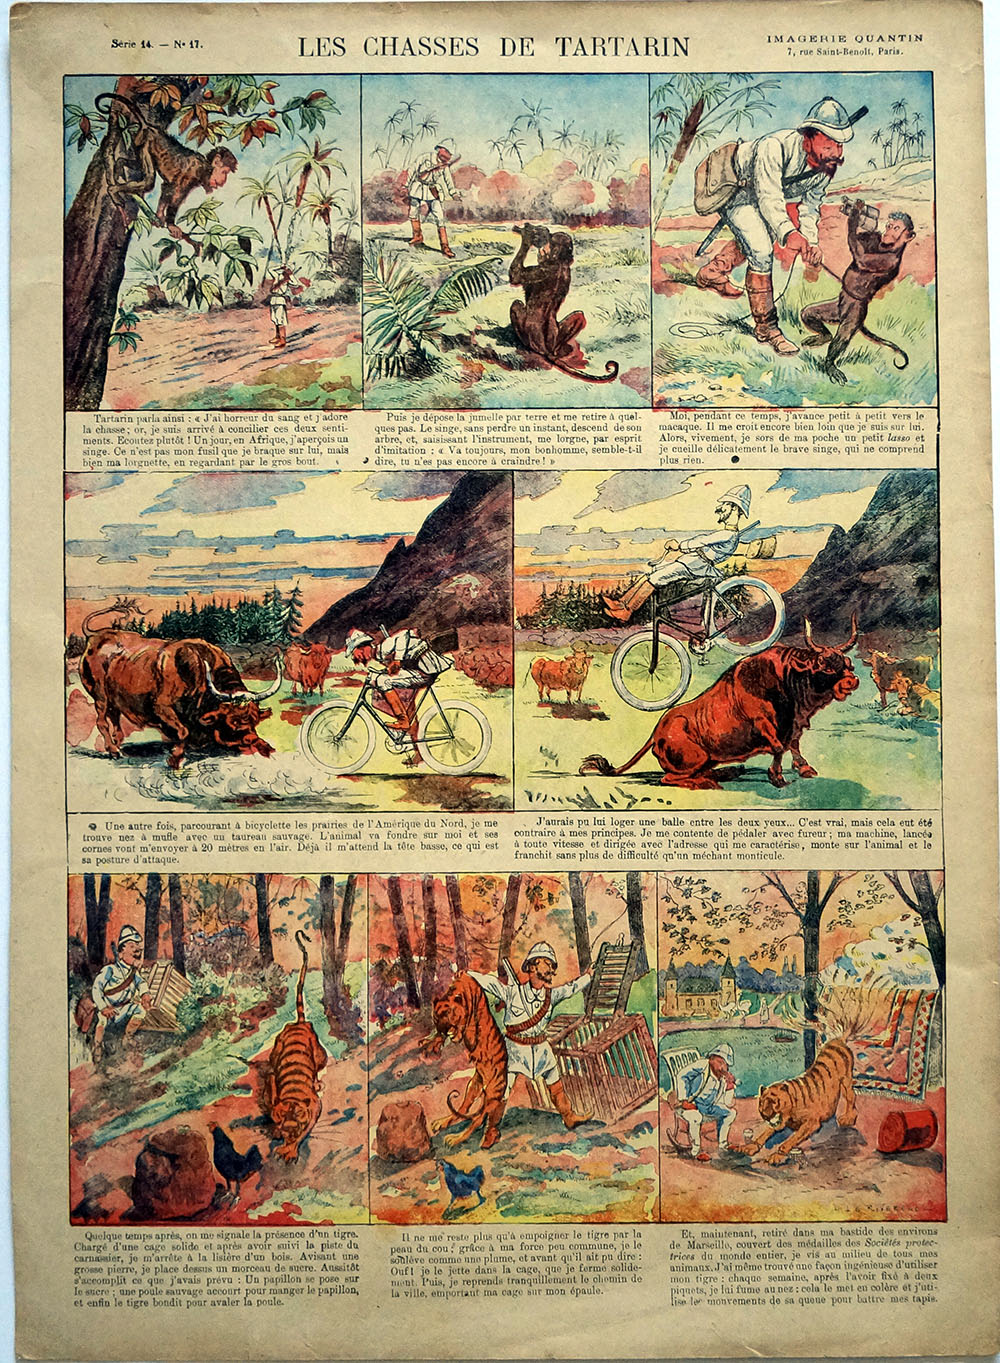 Imagerie dEpinal Les Chasses de Tartarin art by EARLY FRENCH original comic strips from 1888 at The Illustration Art Gallery